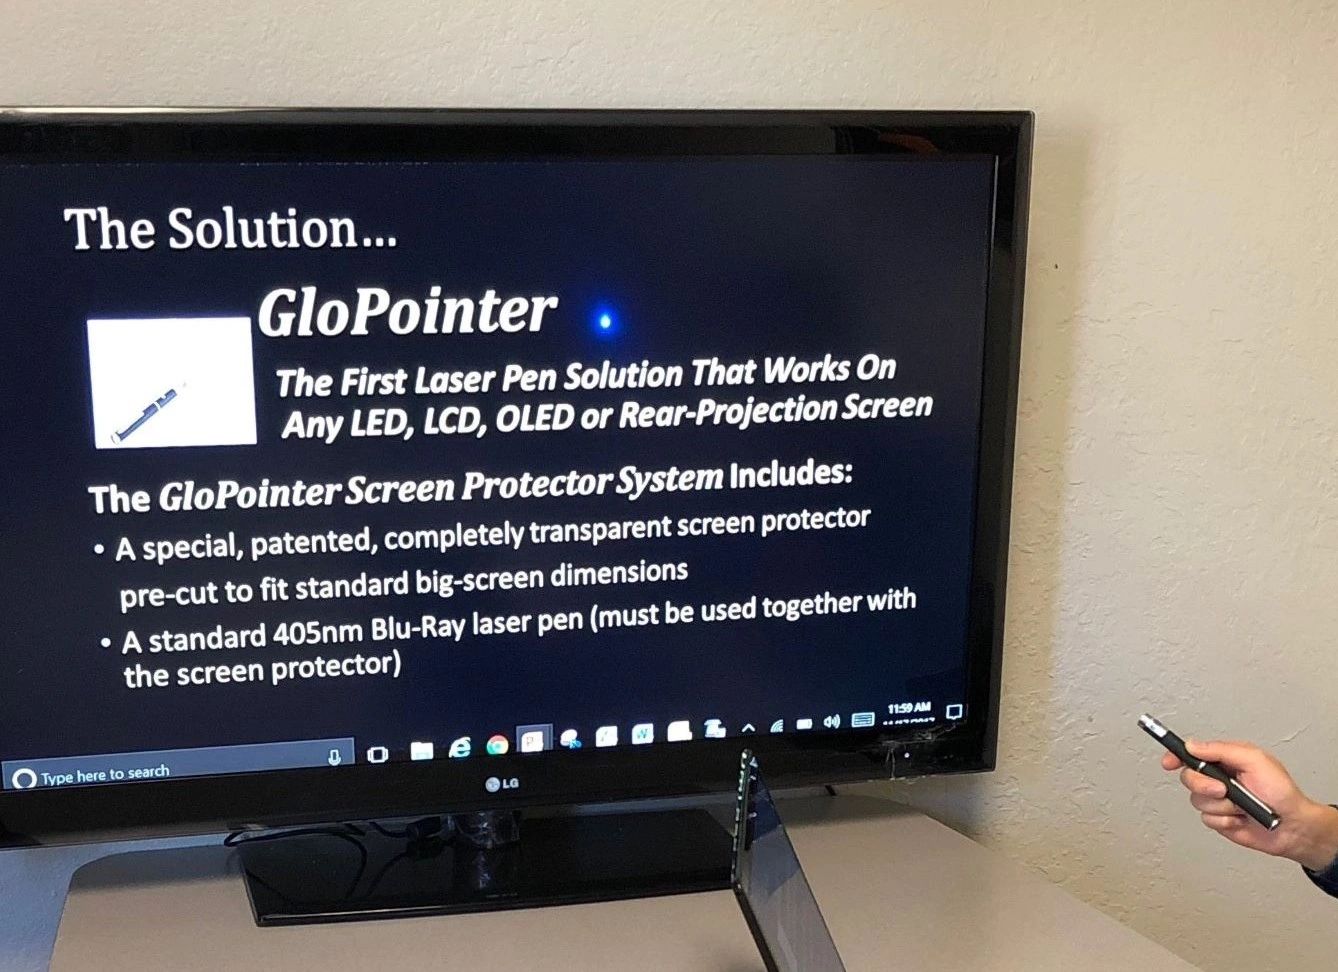 About GloPointer